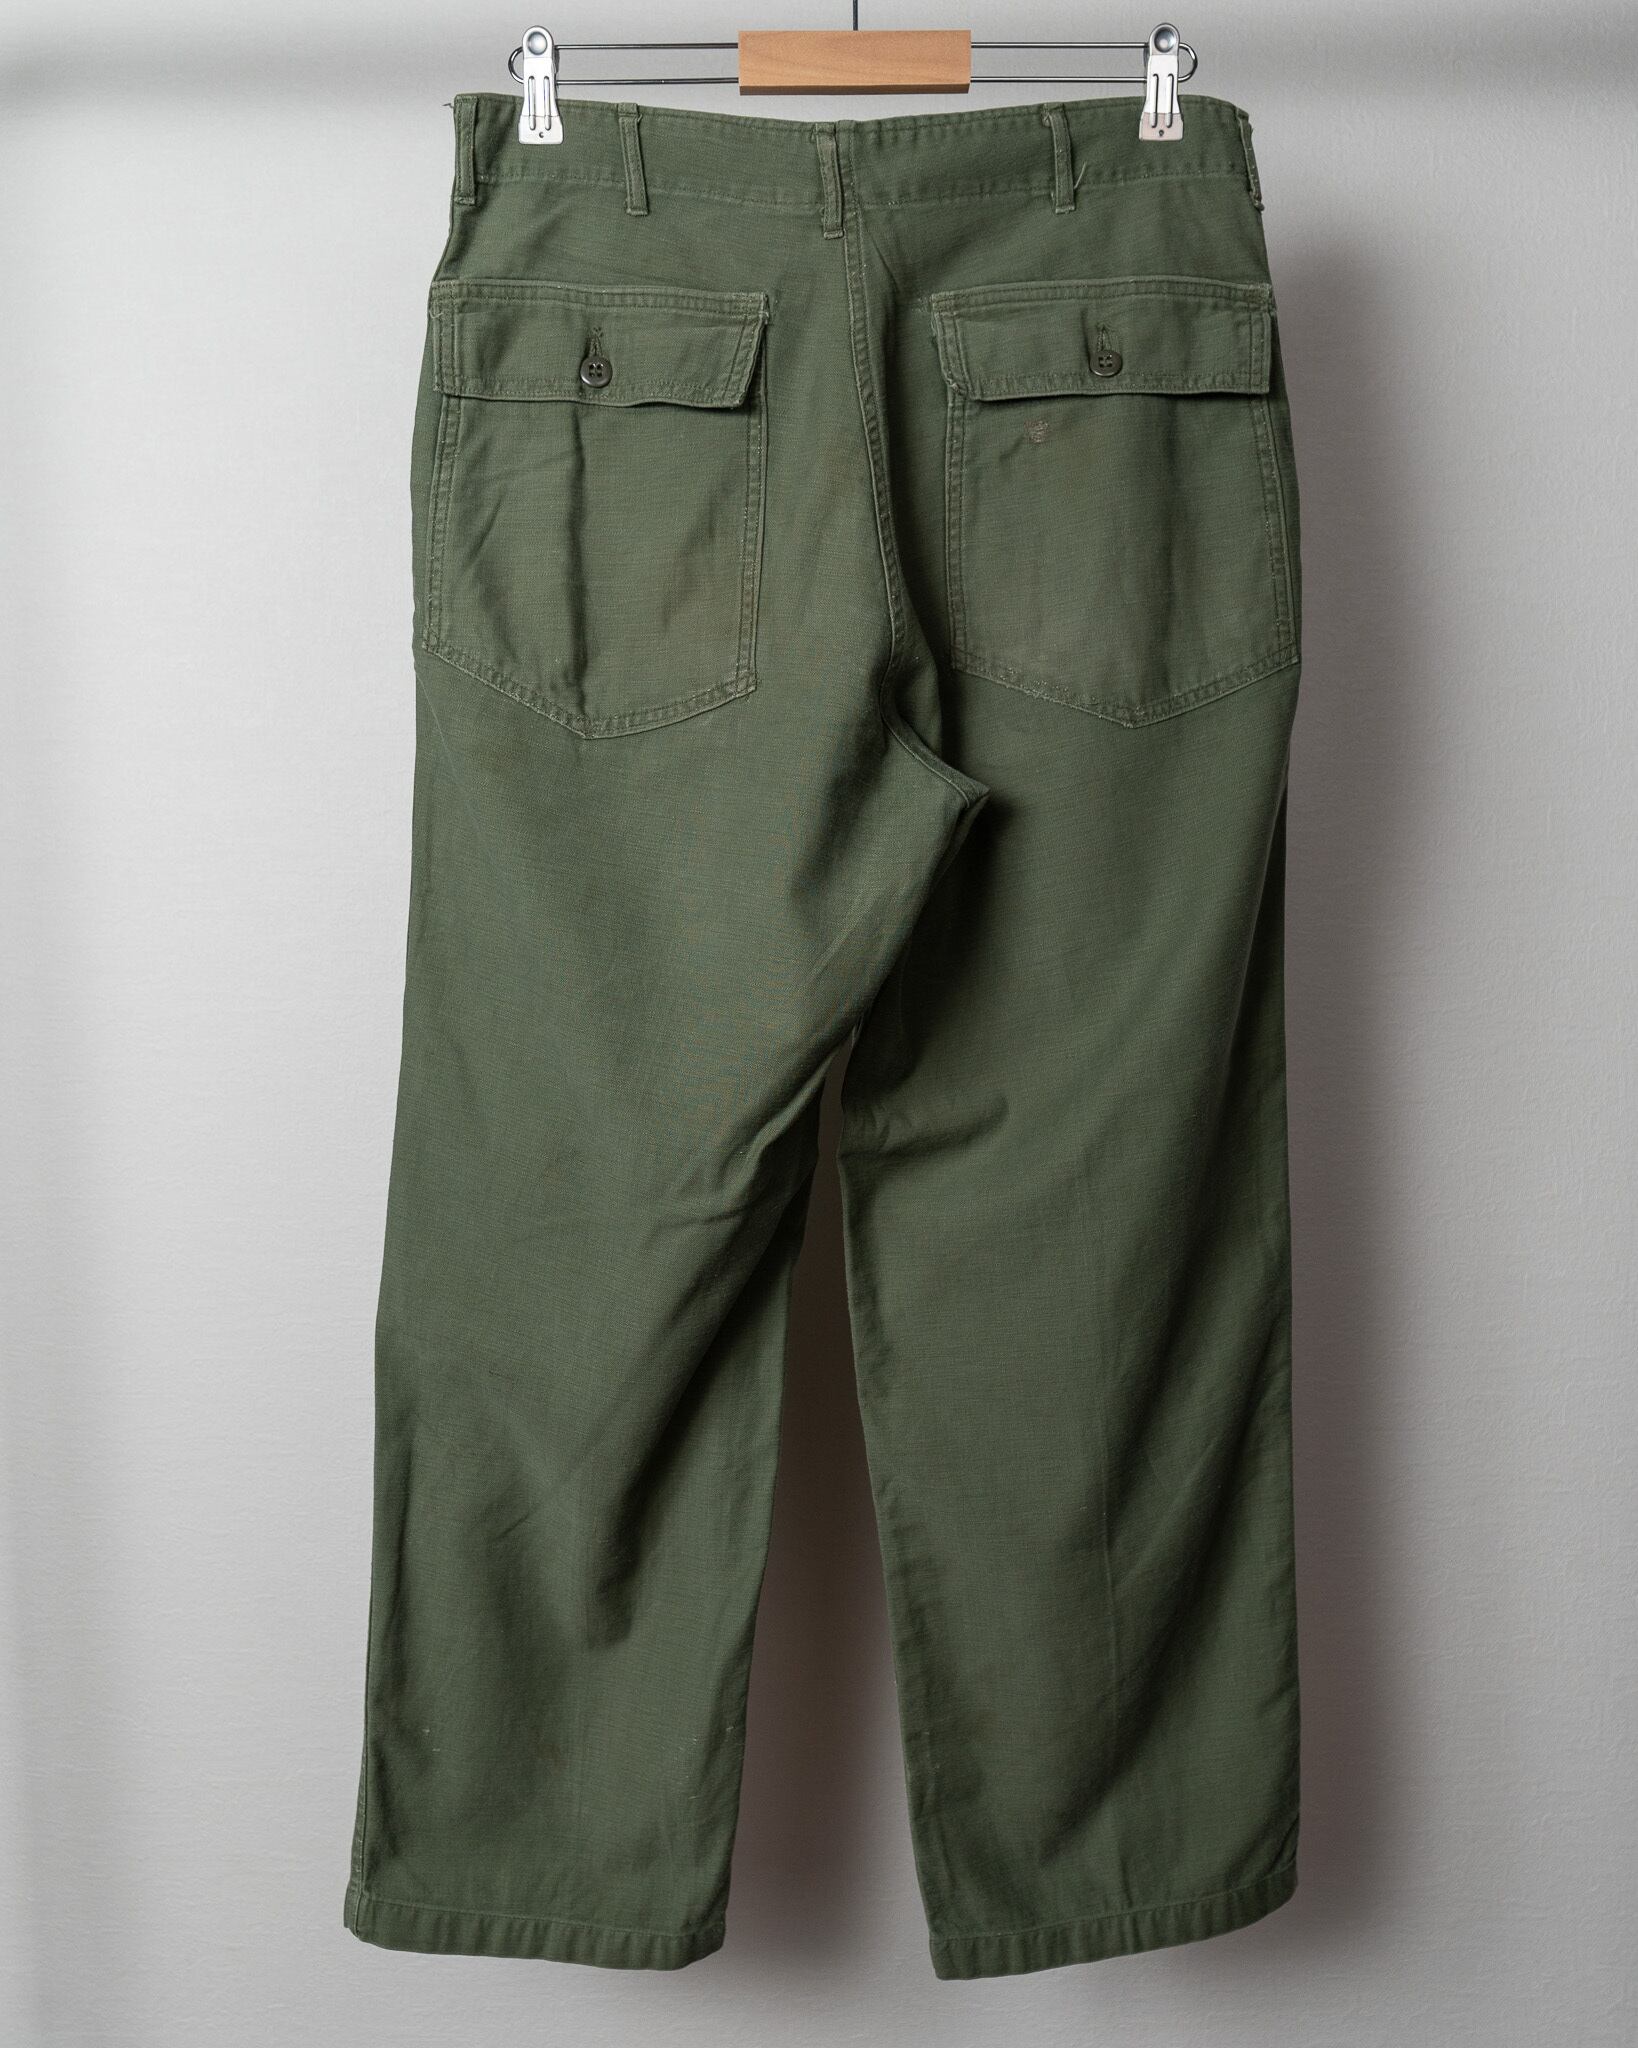 34×31】U.S.Army Utility Trousers OG-107 Used 実物 米軍 ベイカー